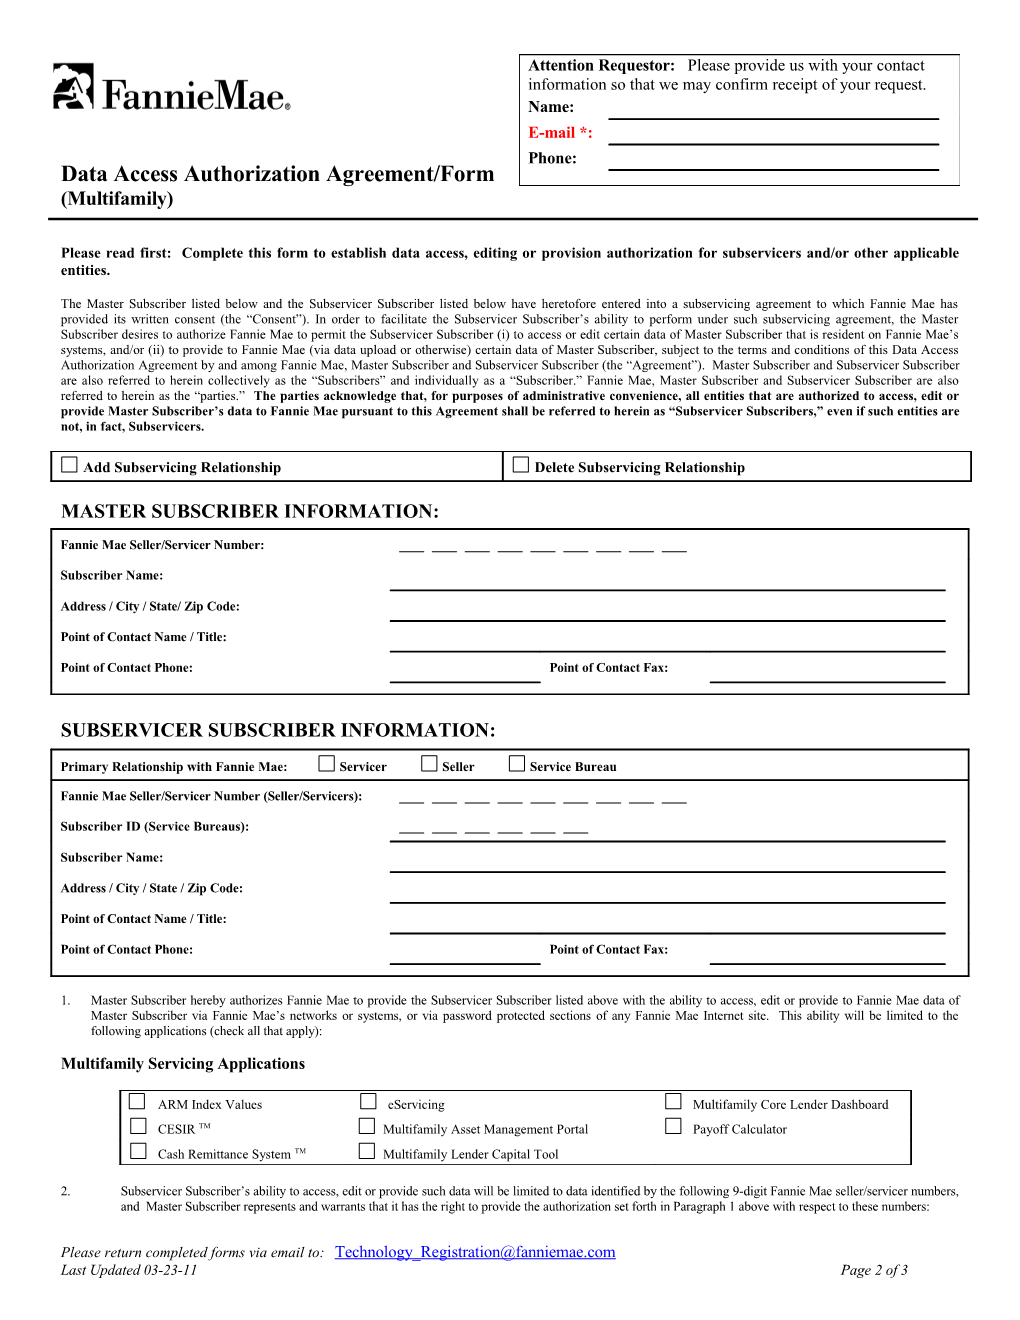 Data Access Authorization Agreement/Form